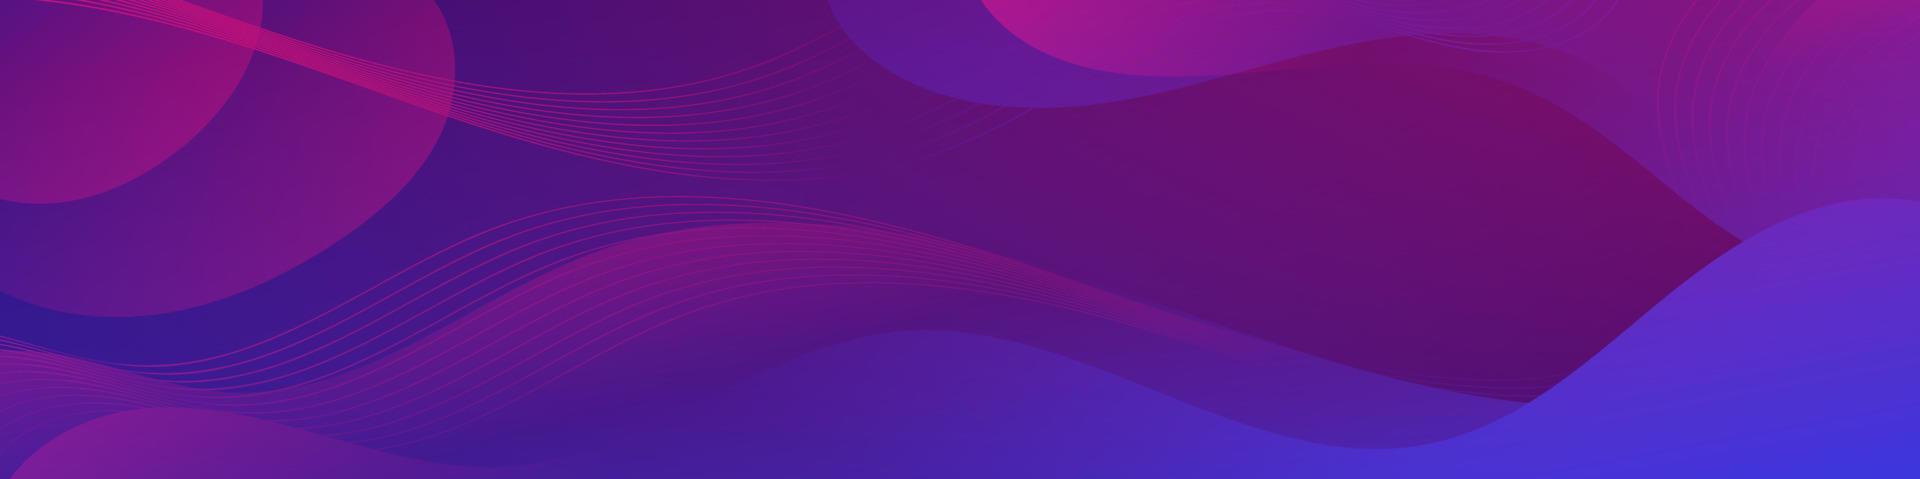 Abstract Blue Purple Fluid Wave Banner Template vector